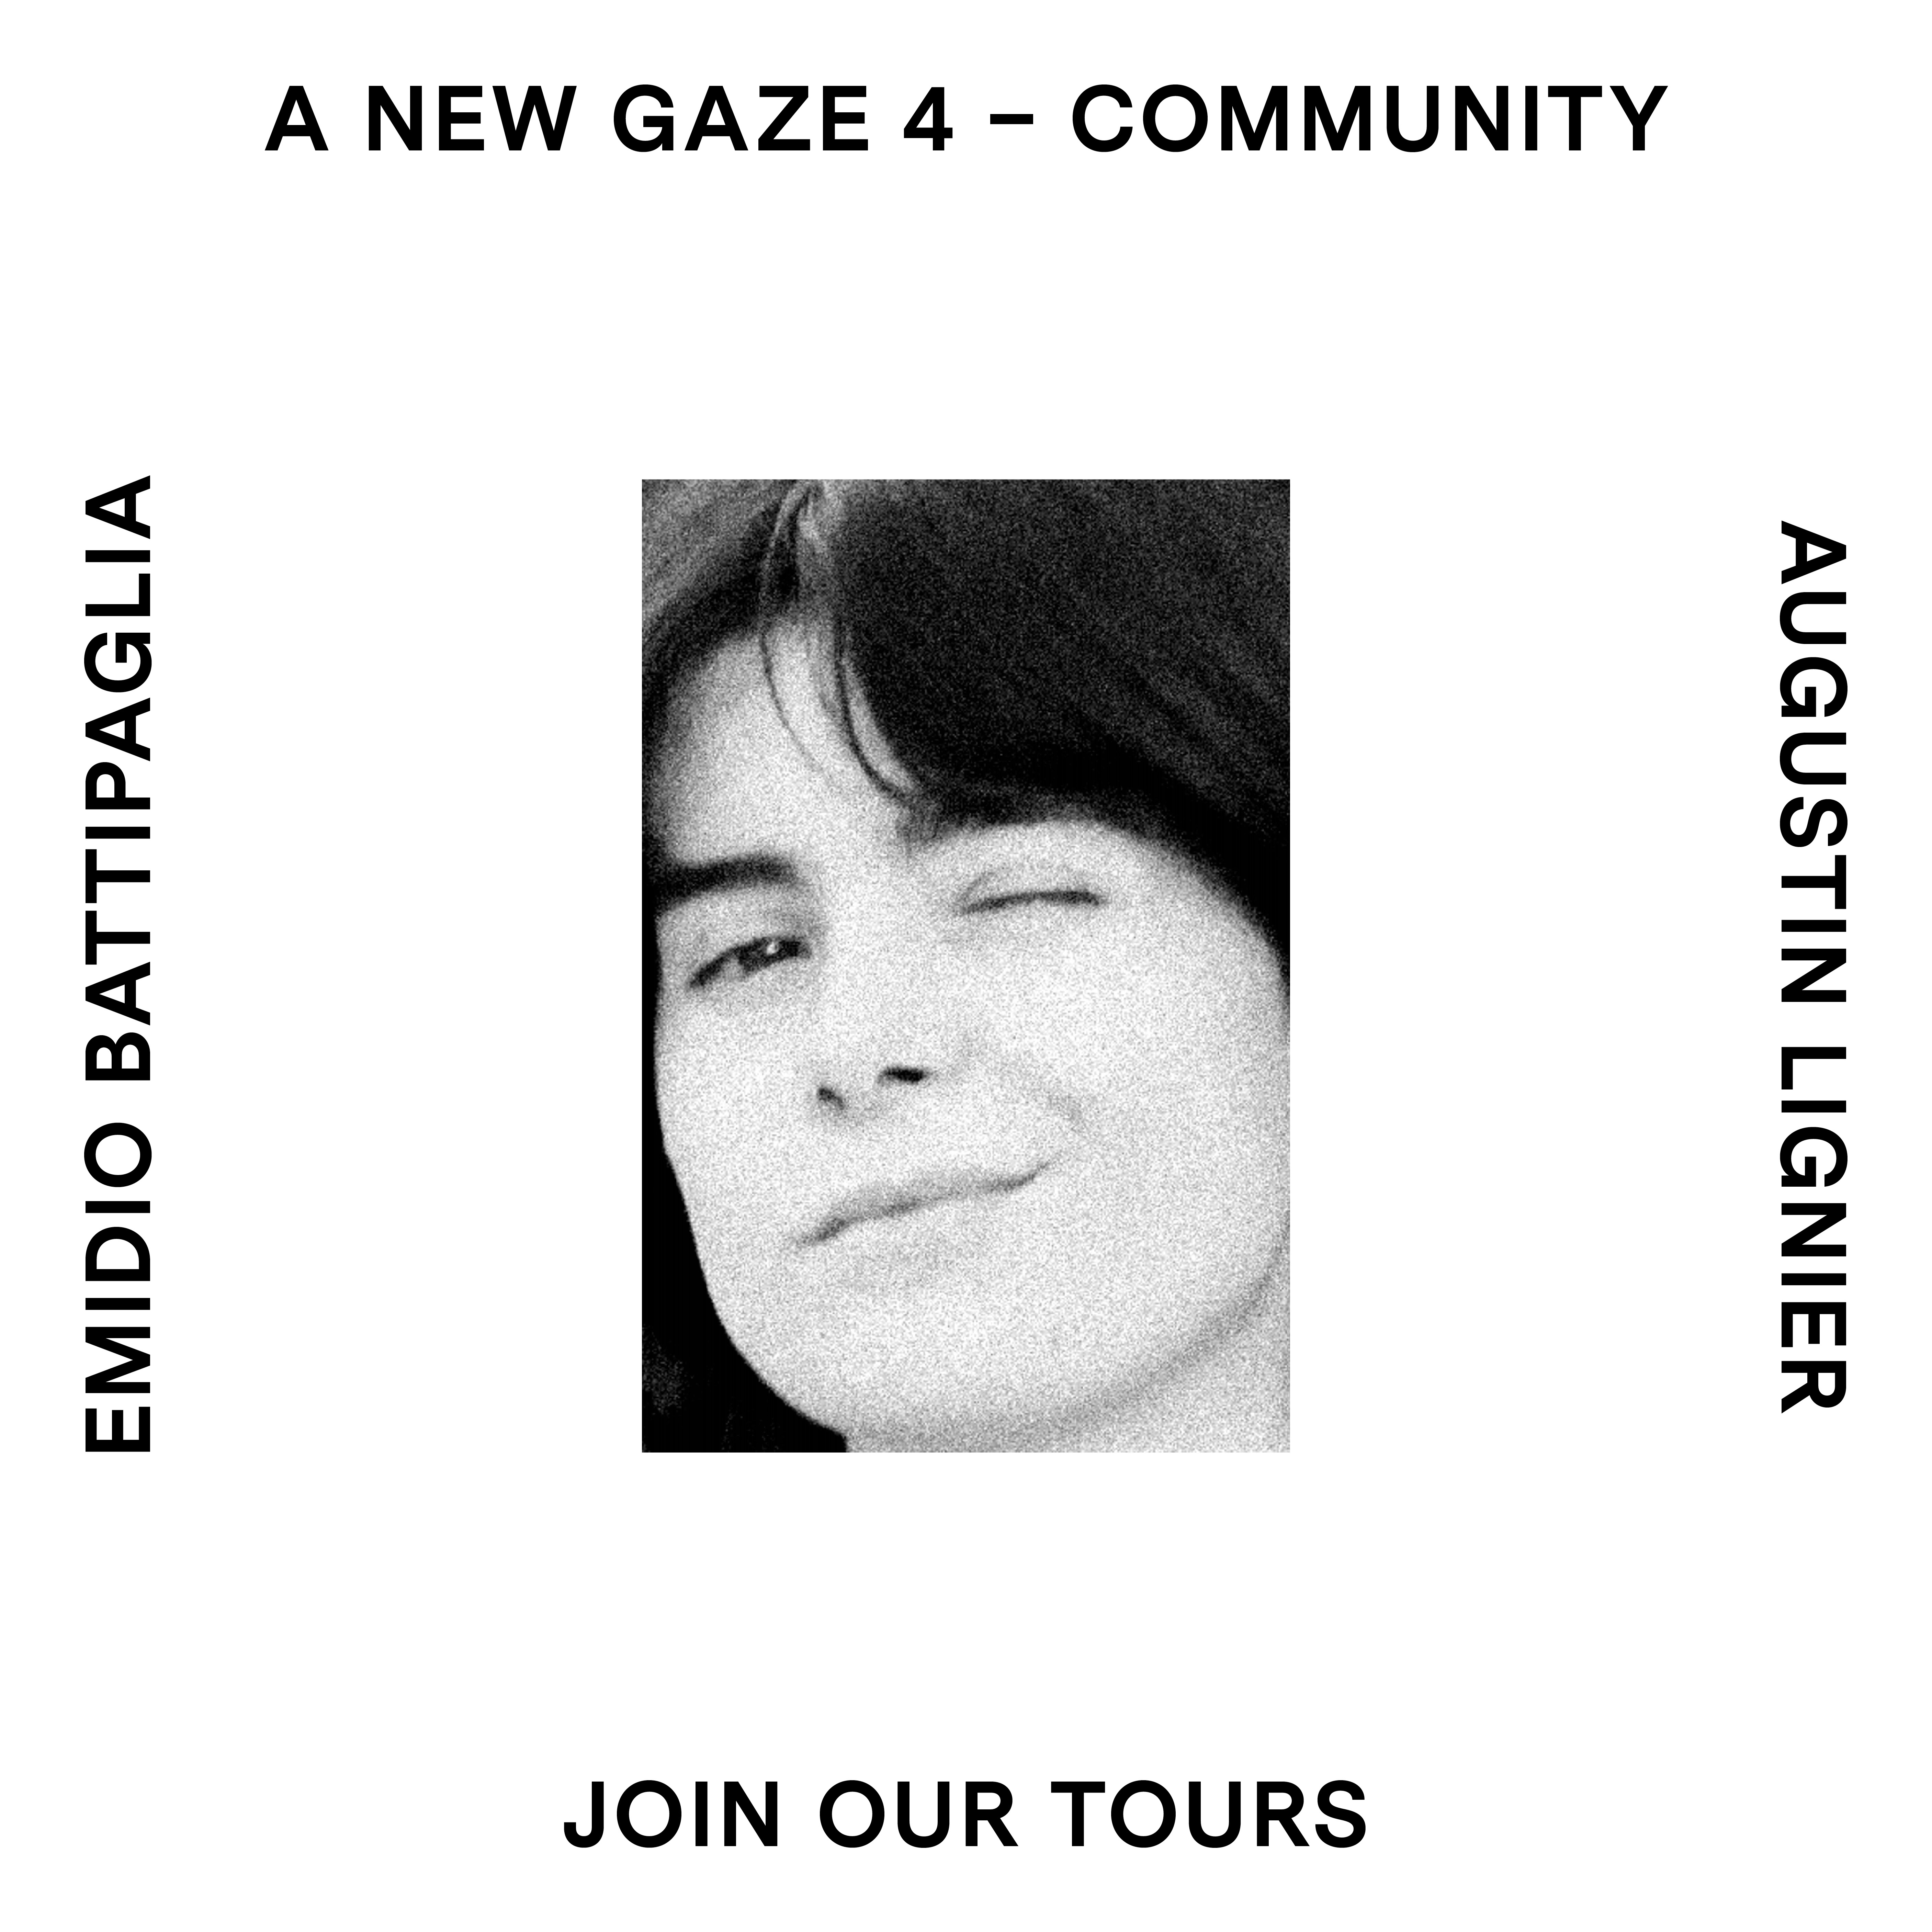 Join us for an exciting exploration! A promotional image for the community tour of the new Gaze 4 community.